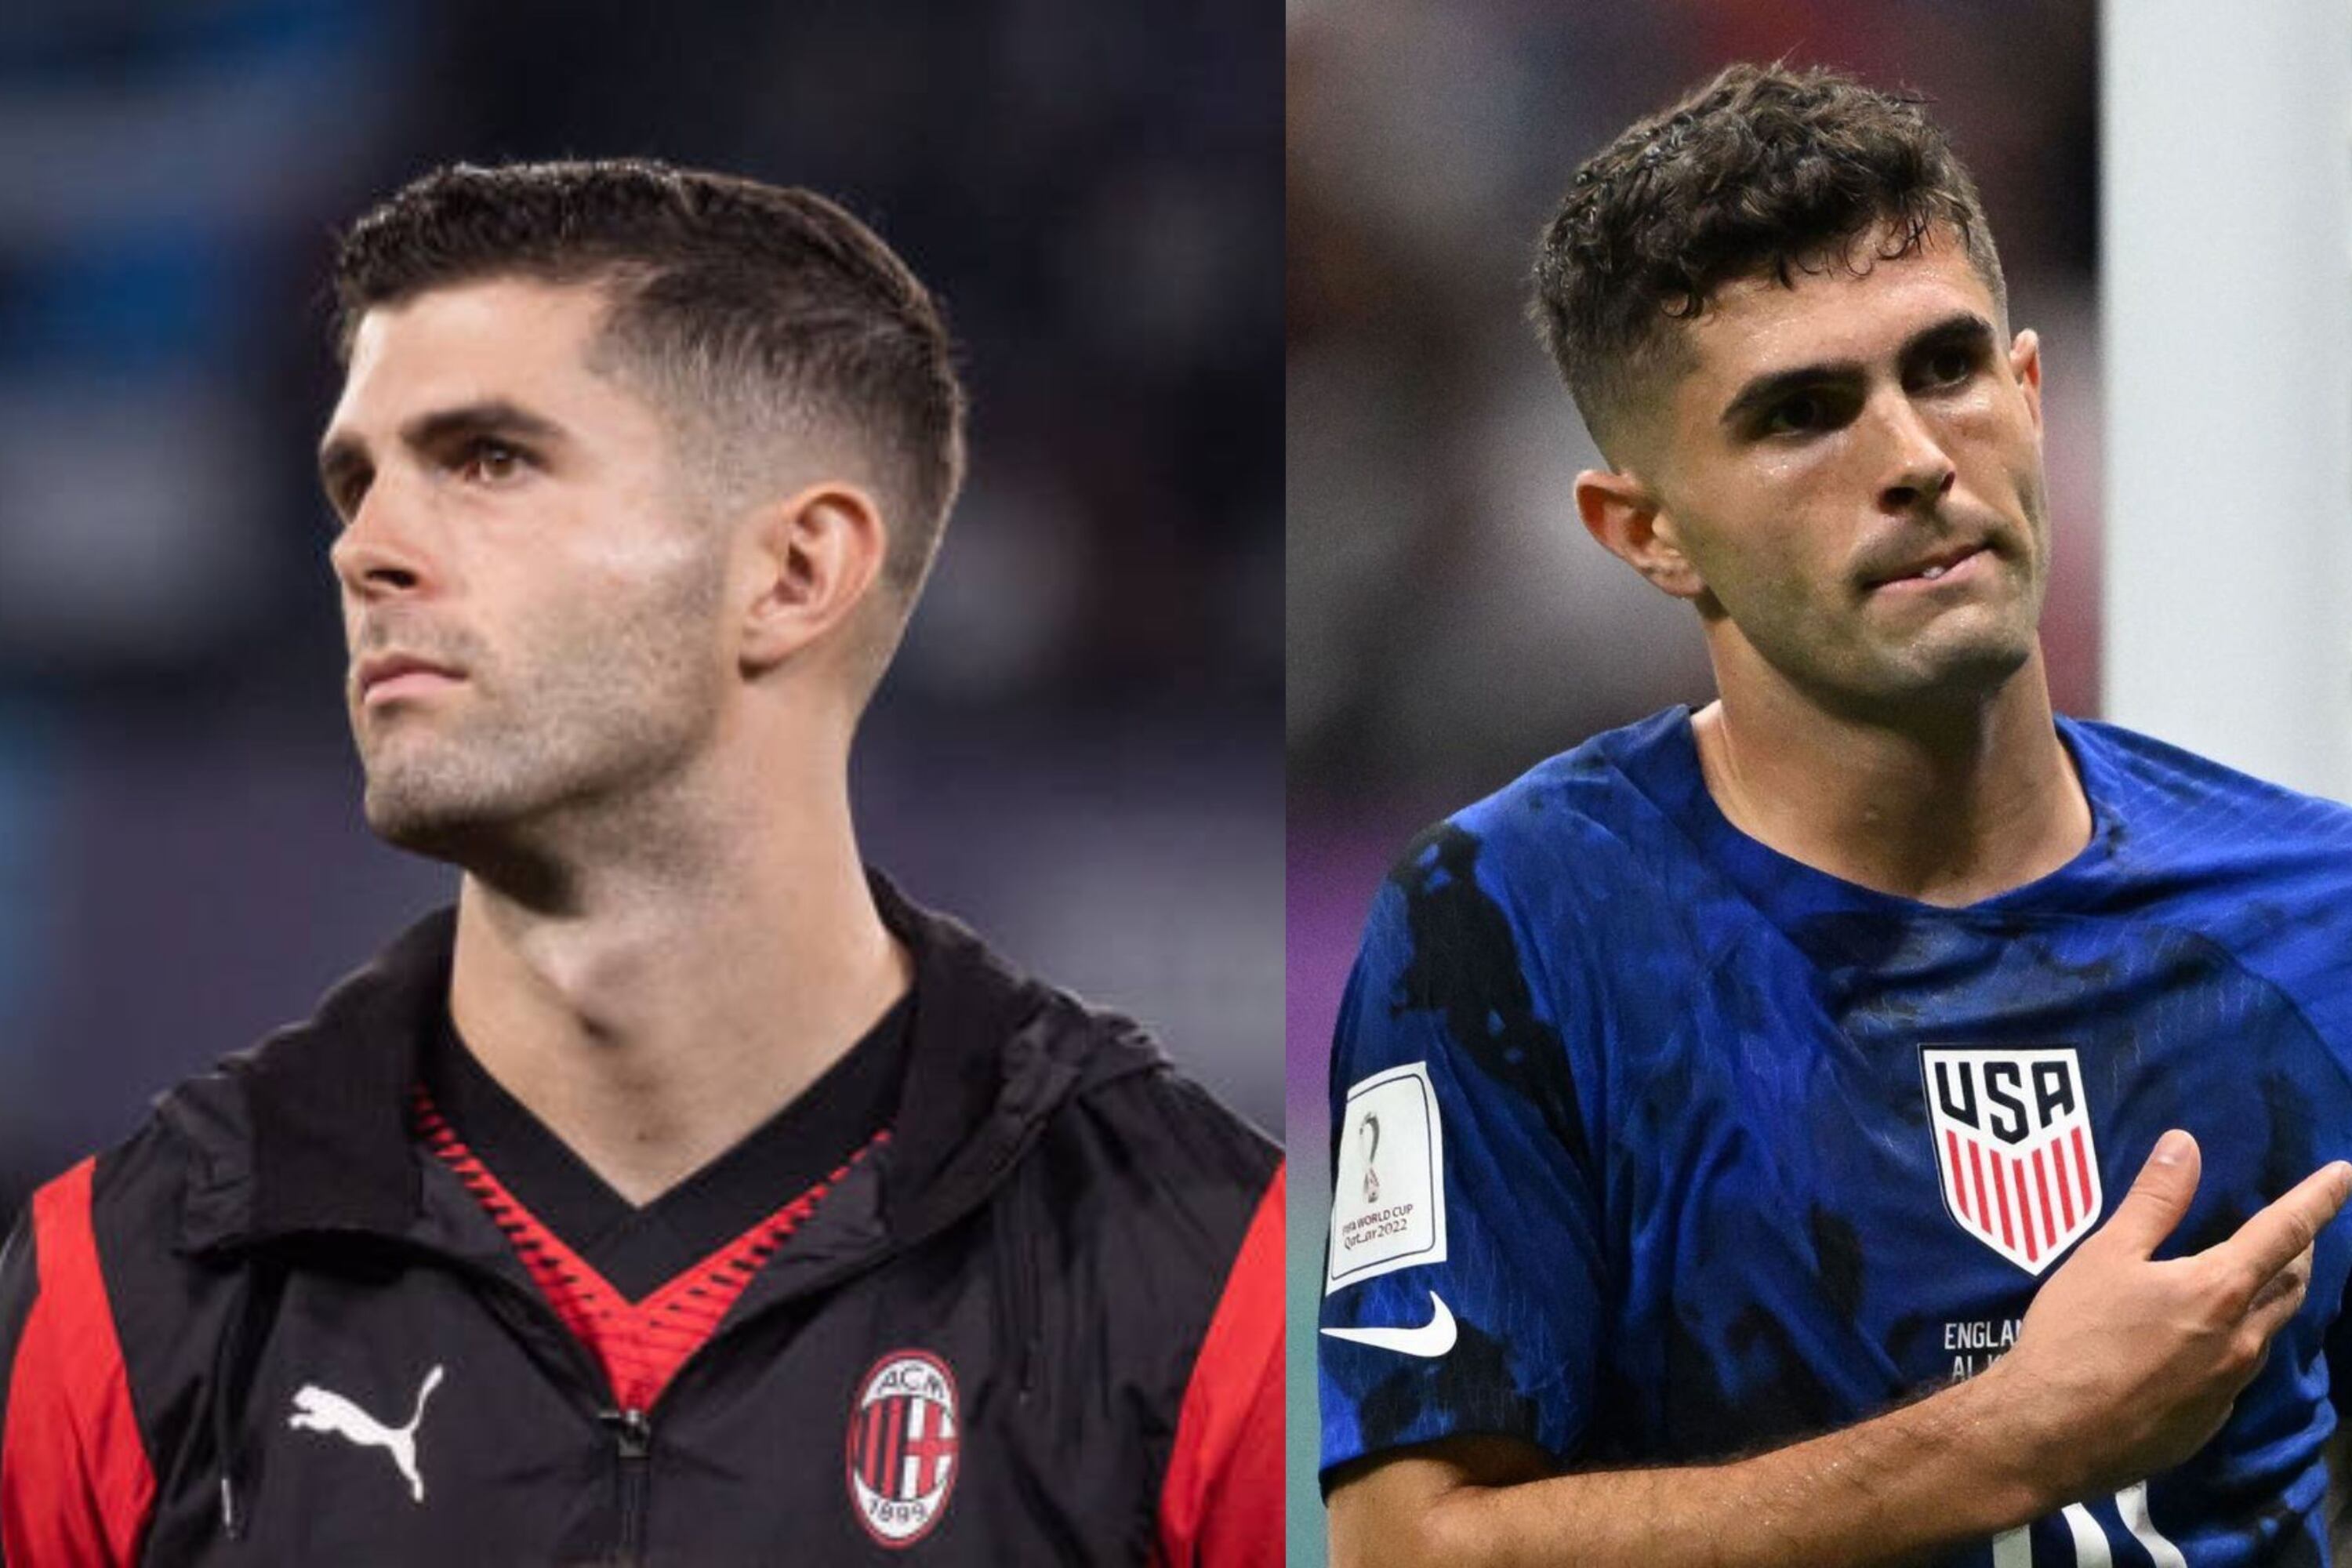 After the injury with Milan, Berhalter's decision with Pulisic for the Concacaf Nations League